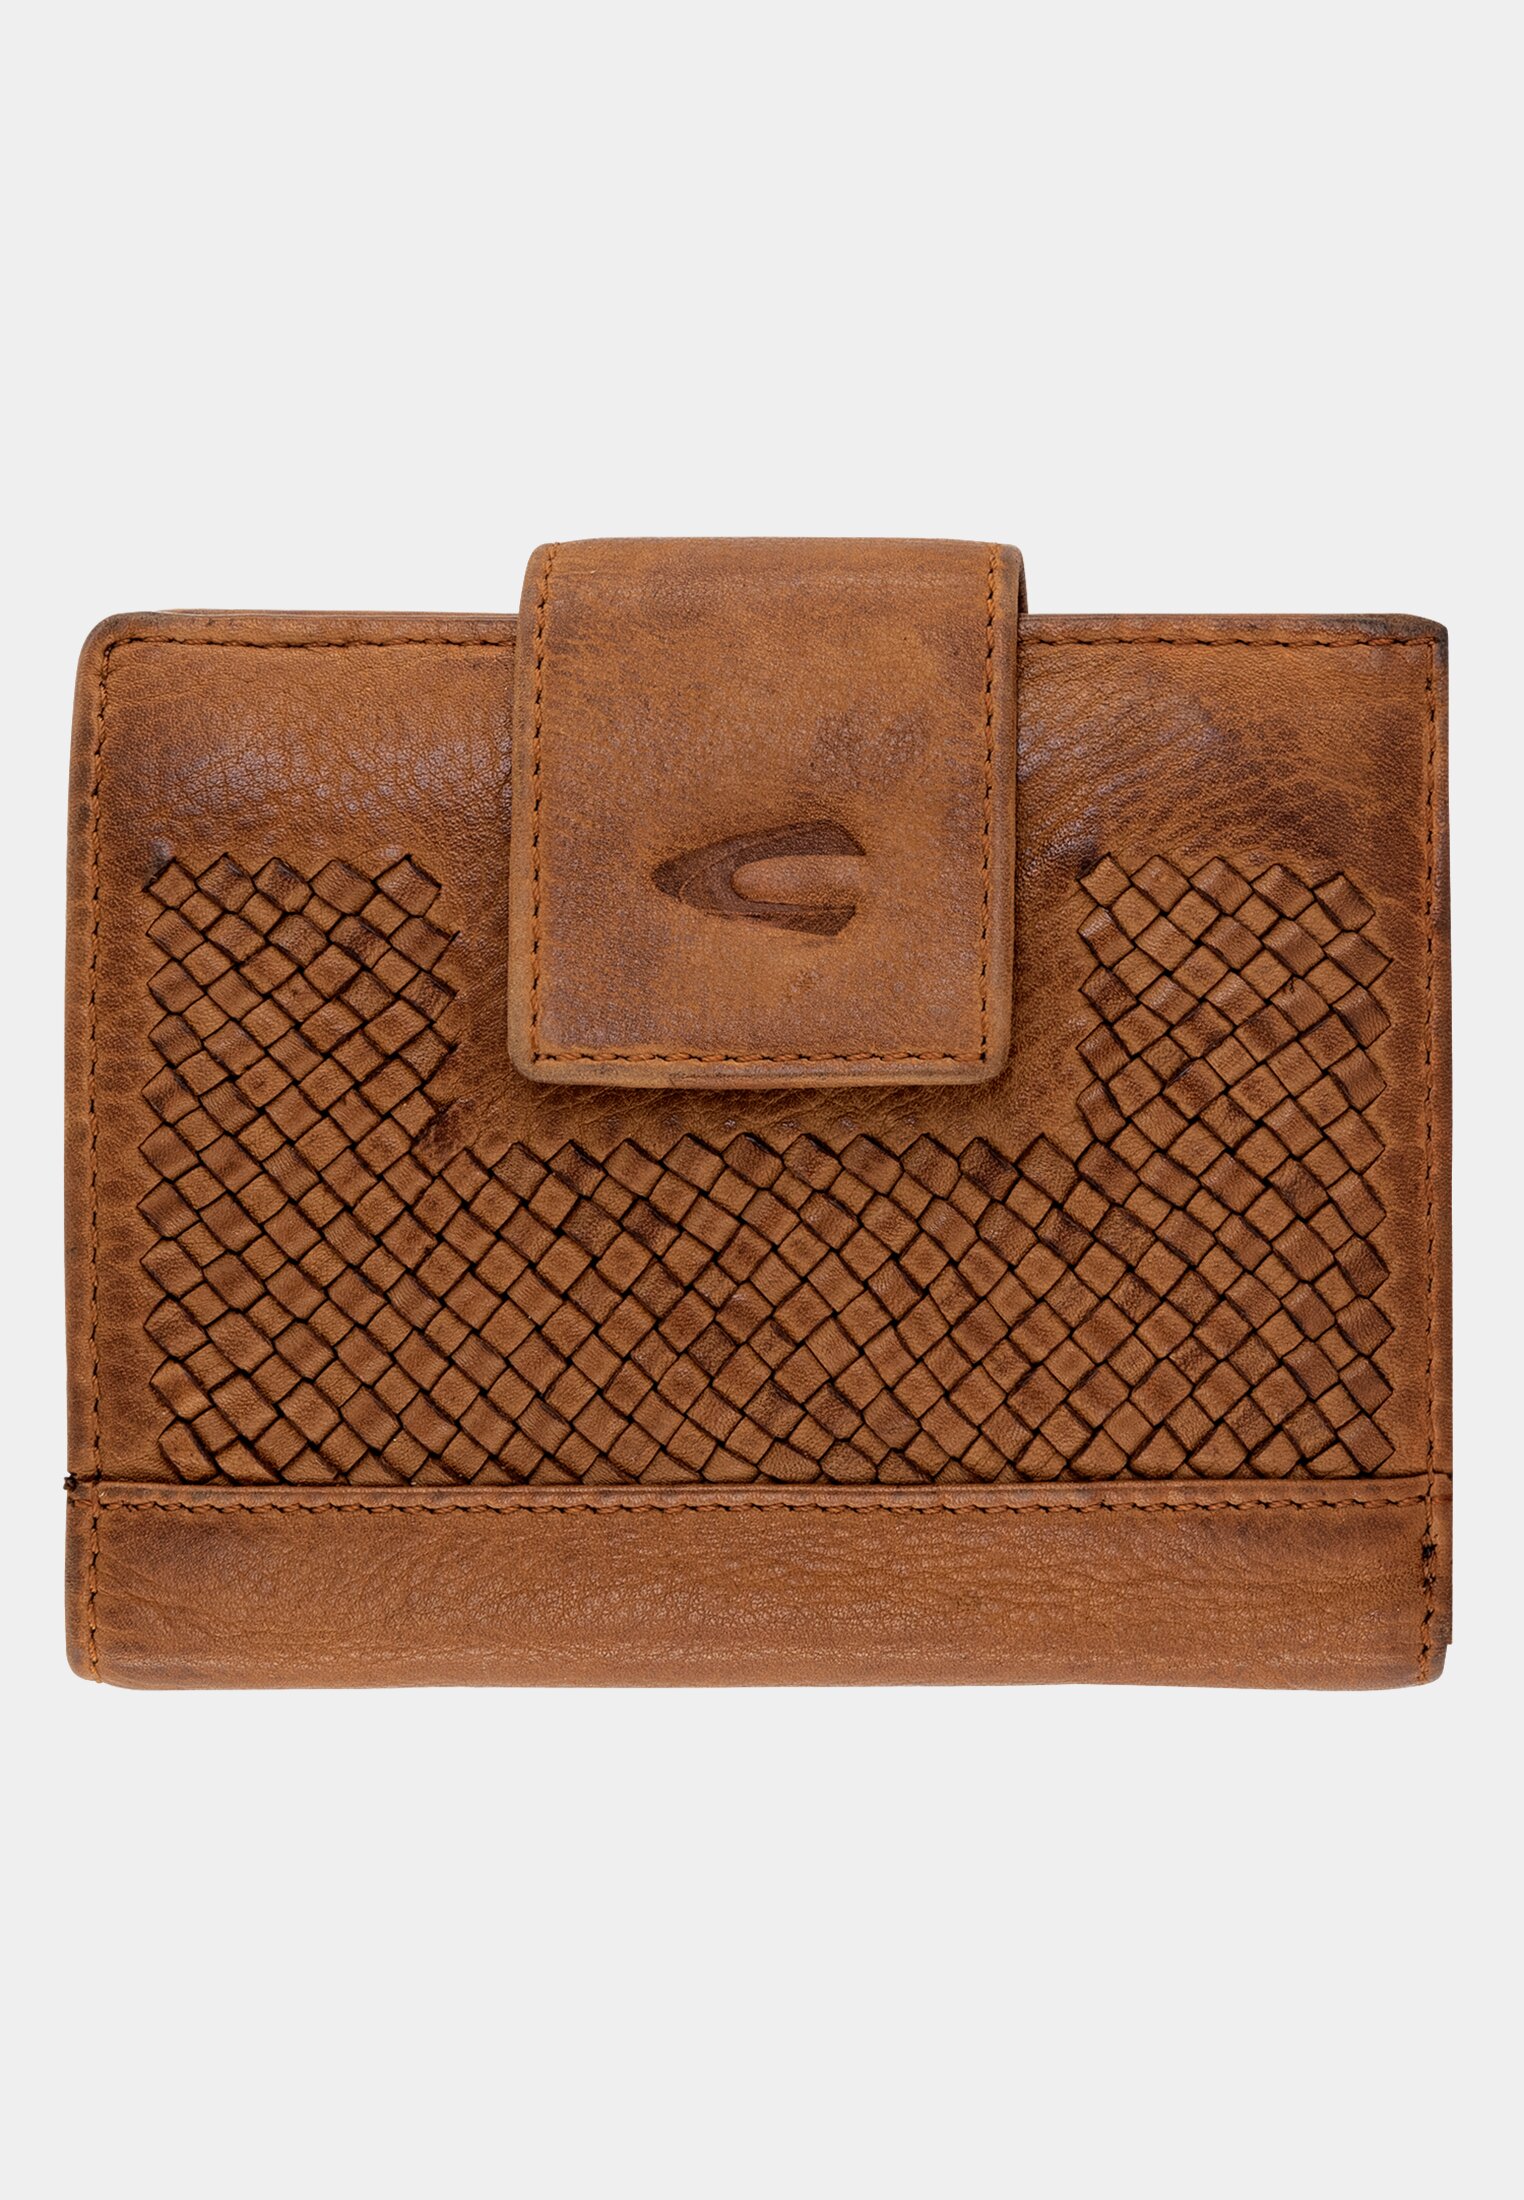 Camel Active Flap wallet made from genius leather